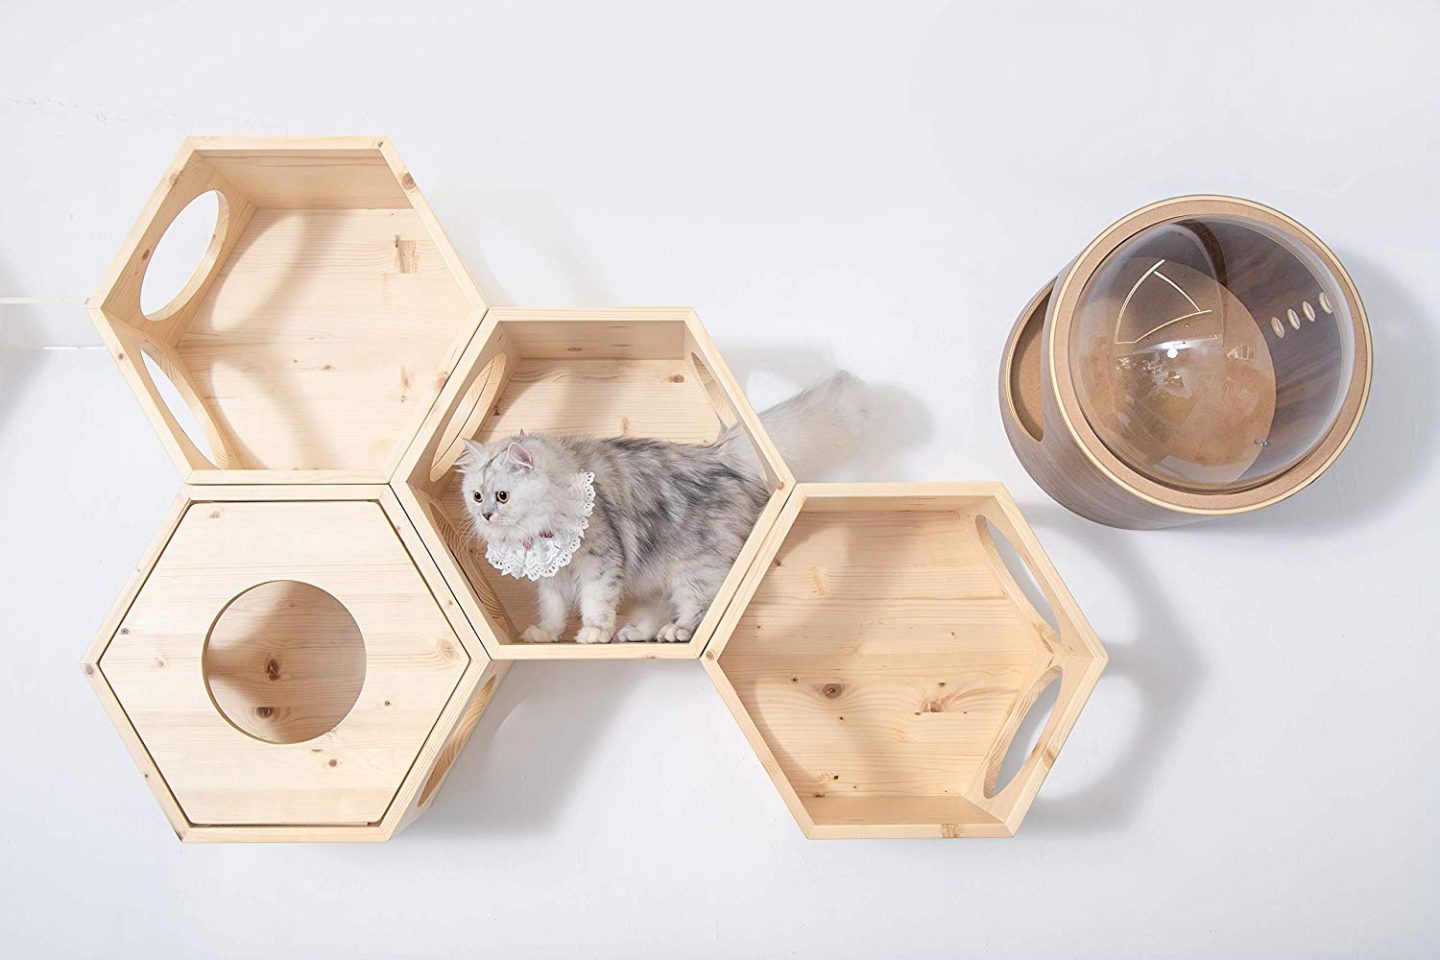 Hexagonal, almost honeycomb shaped solid wood cat shelves that interlock and can make entire cat playgyms.